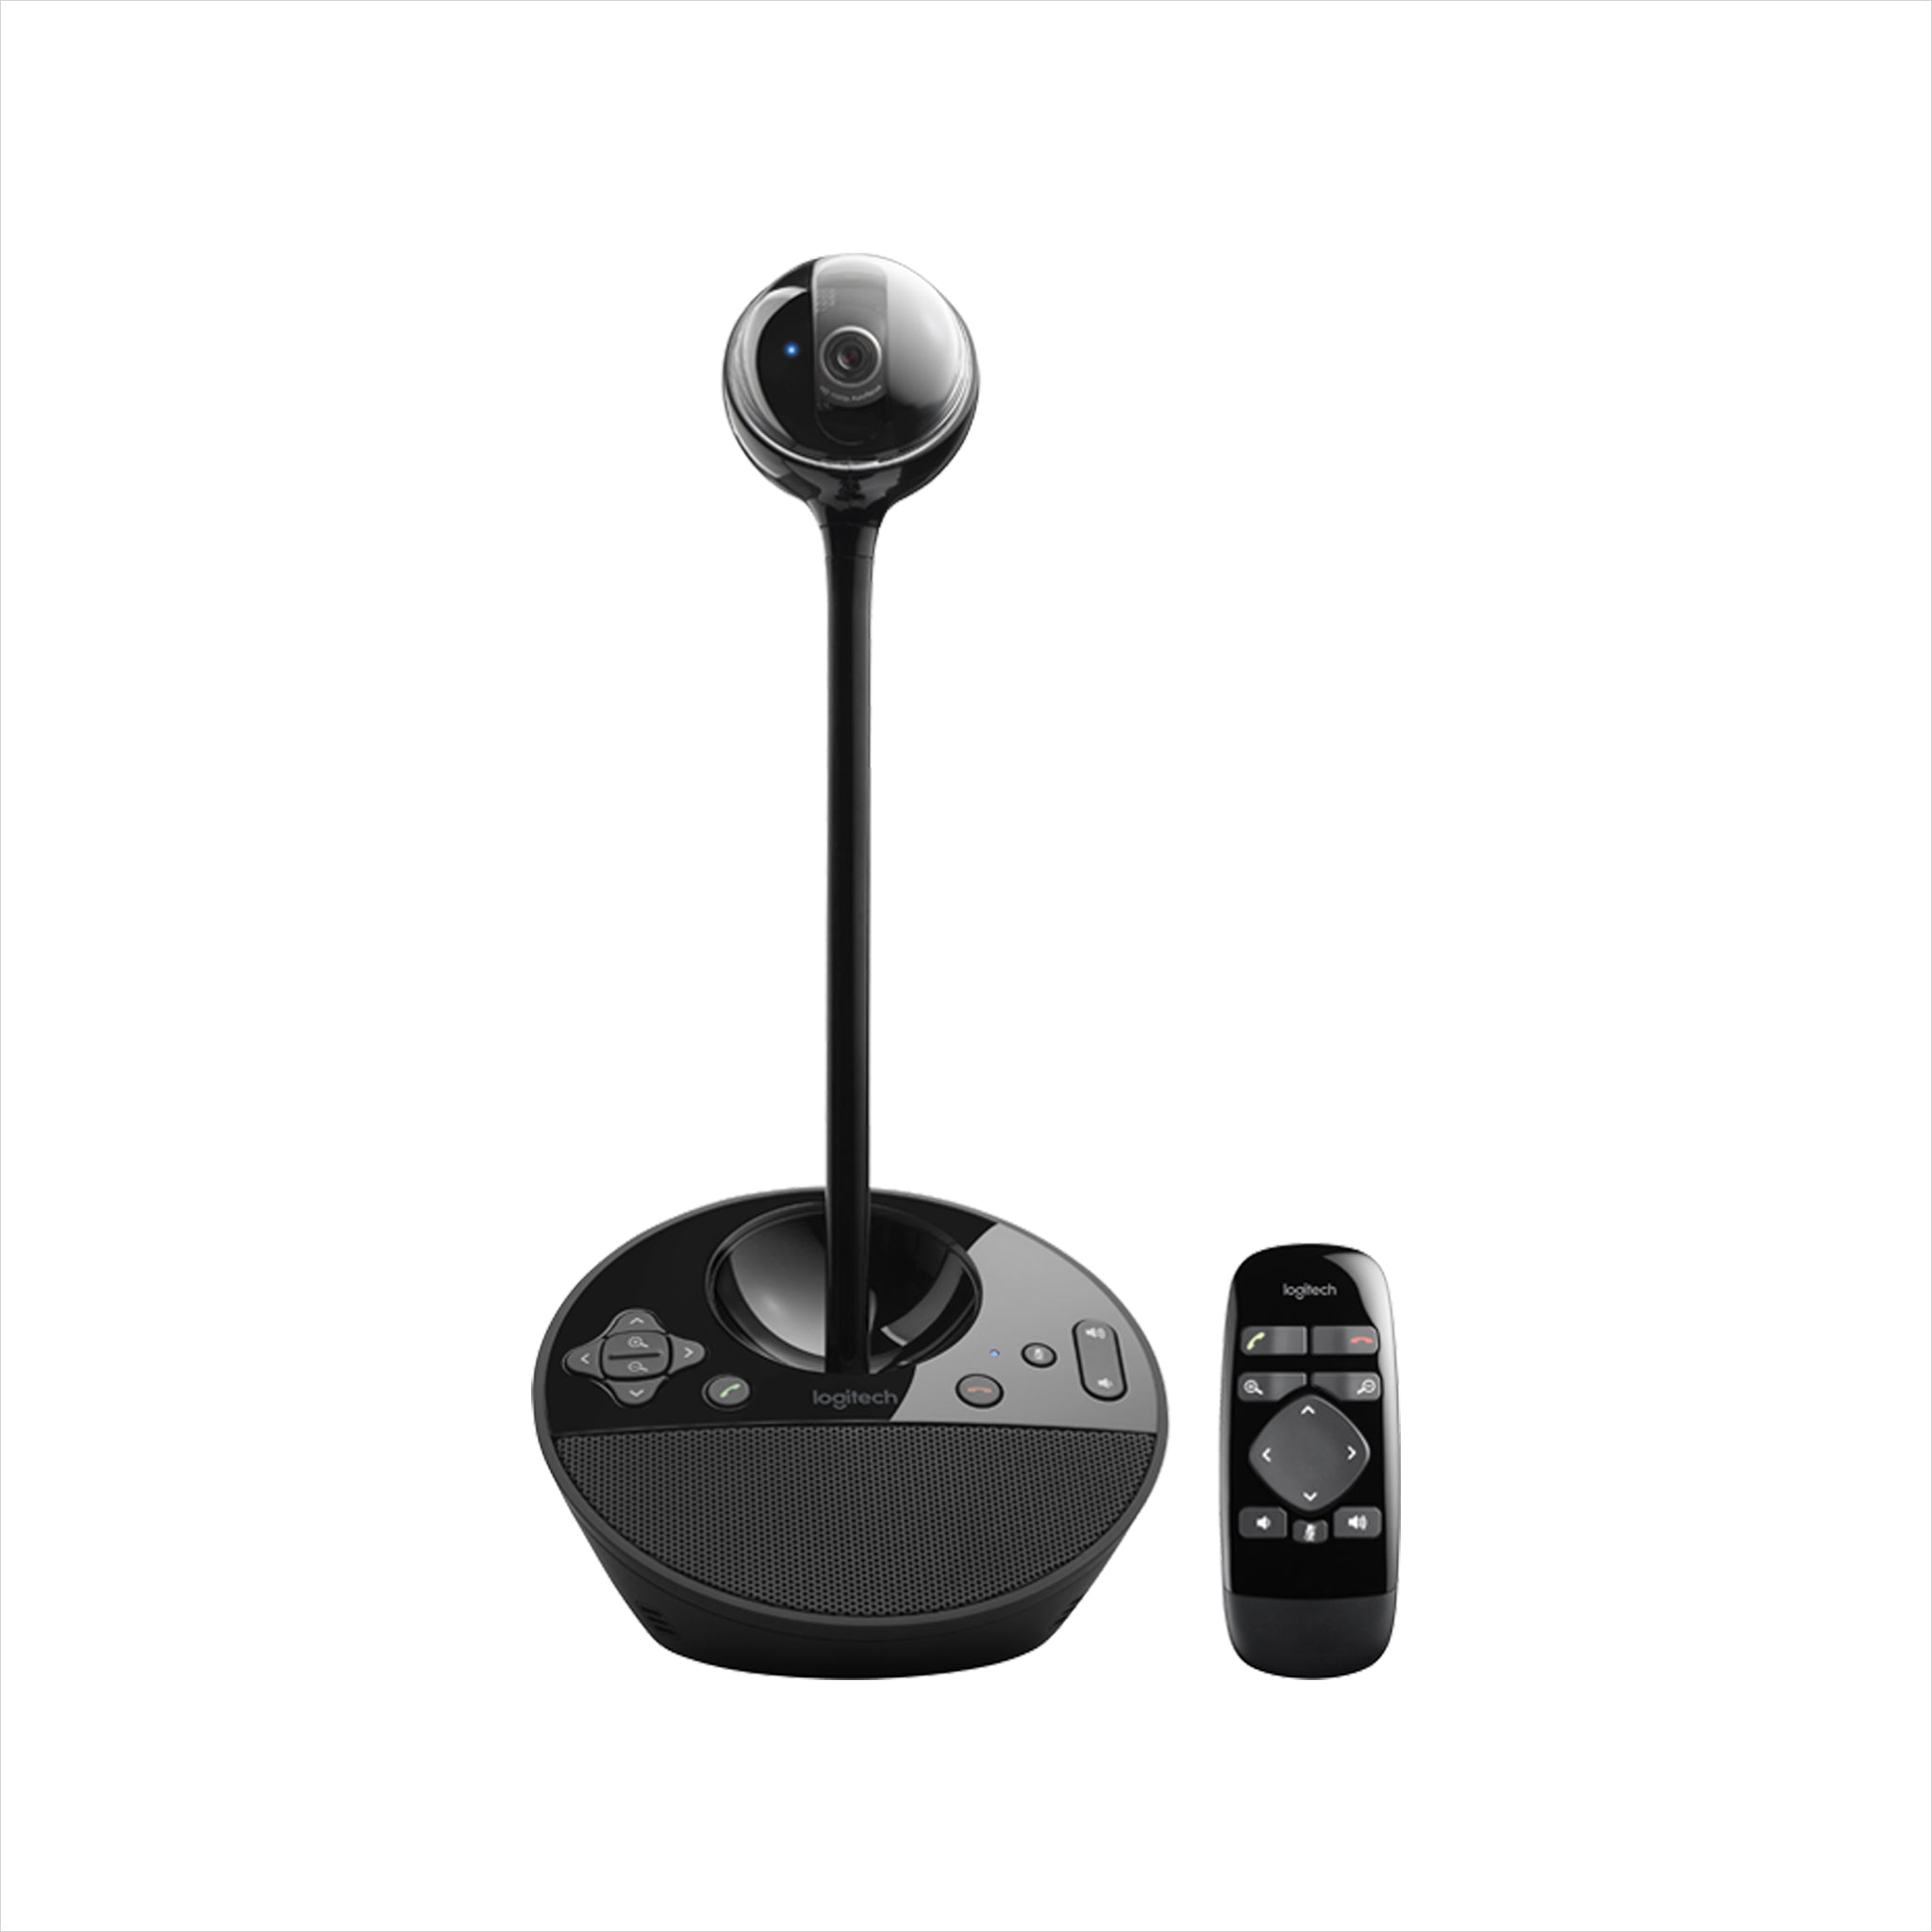 Logitech BCC950 - Desktop Video Conferencing Cam, Full HD Video (1080p30), HD Zoom 1.2x, For Small Spaces | AL-VoIP Store